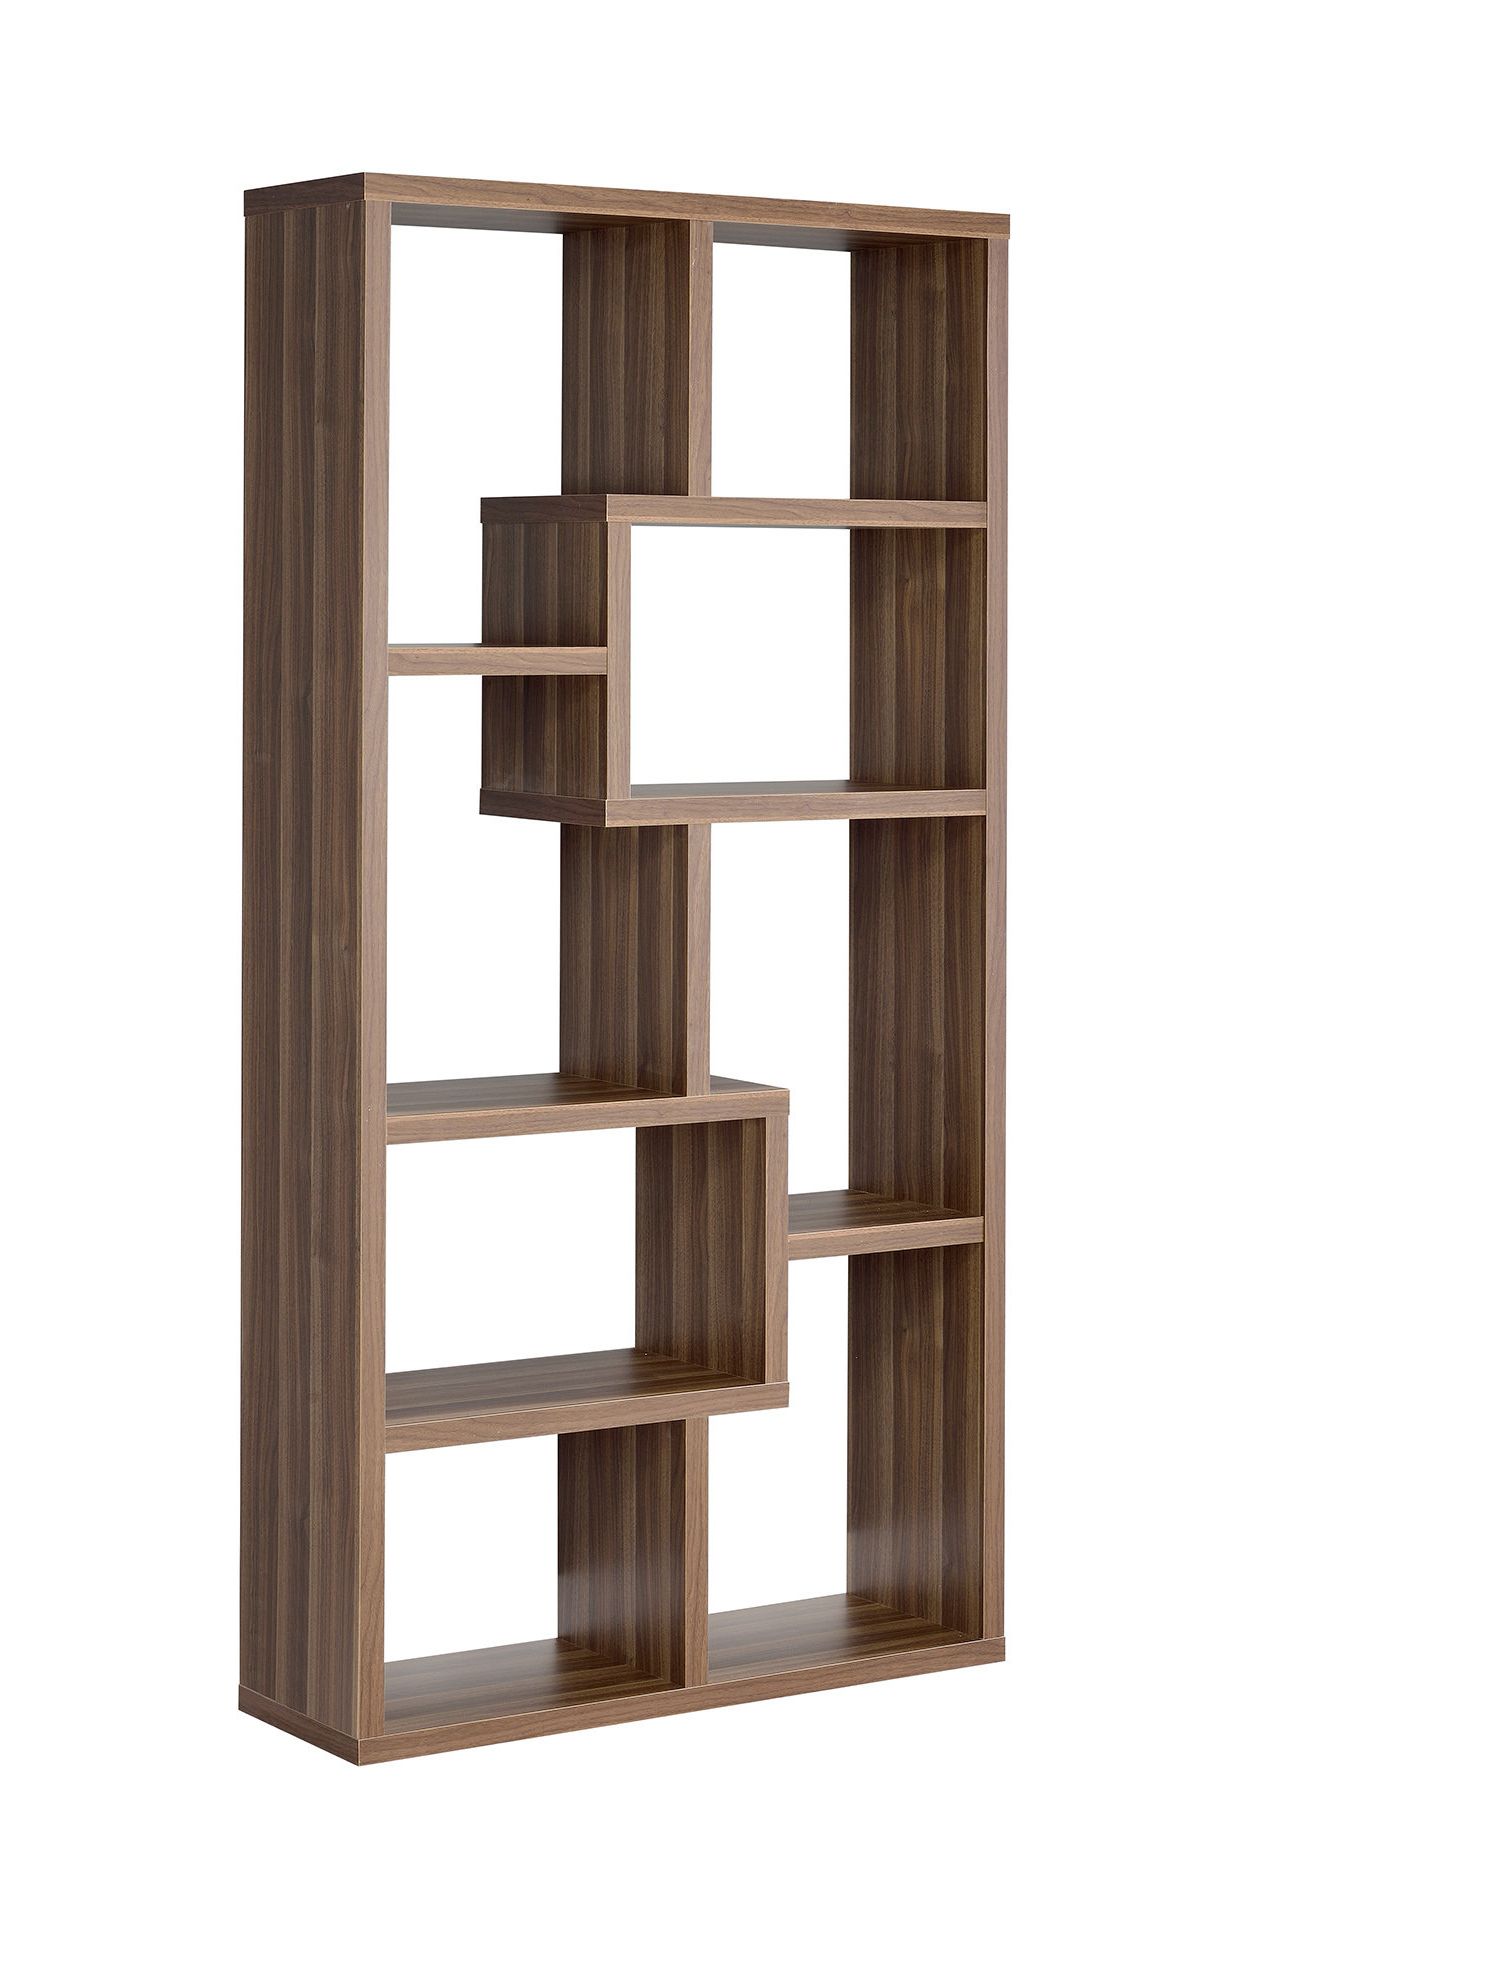 Flavius Geometric Bookcase For Most Recently Released Vaccaro Geometric Bookcases (View 6 of 20)